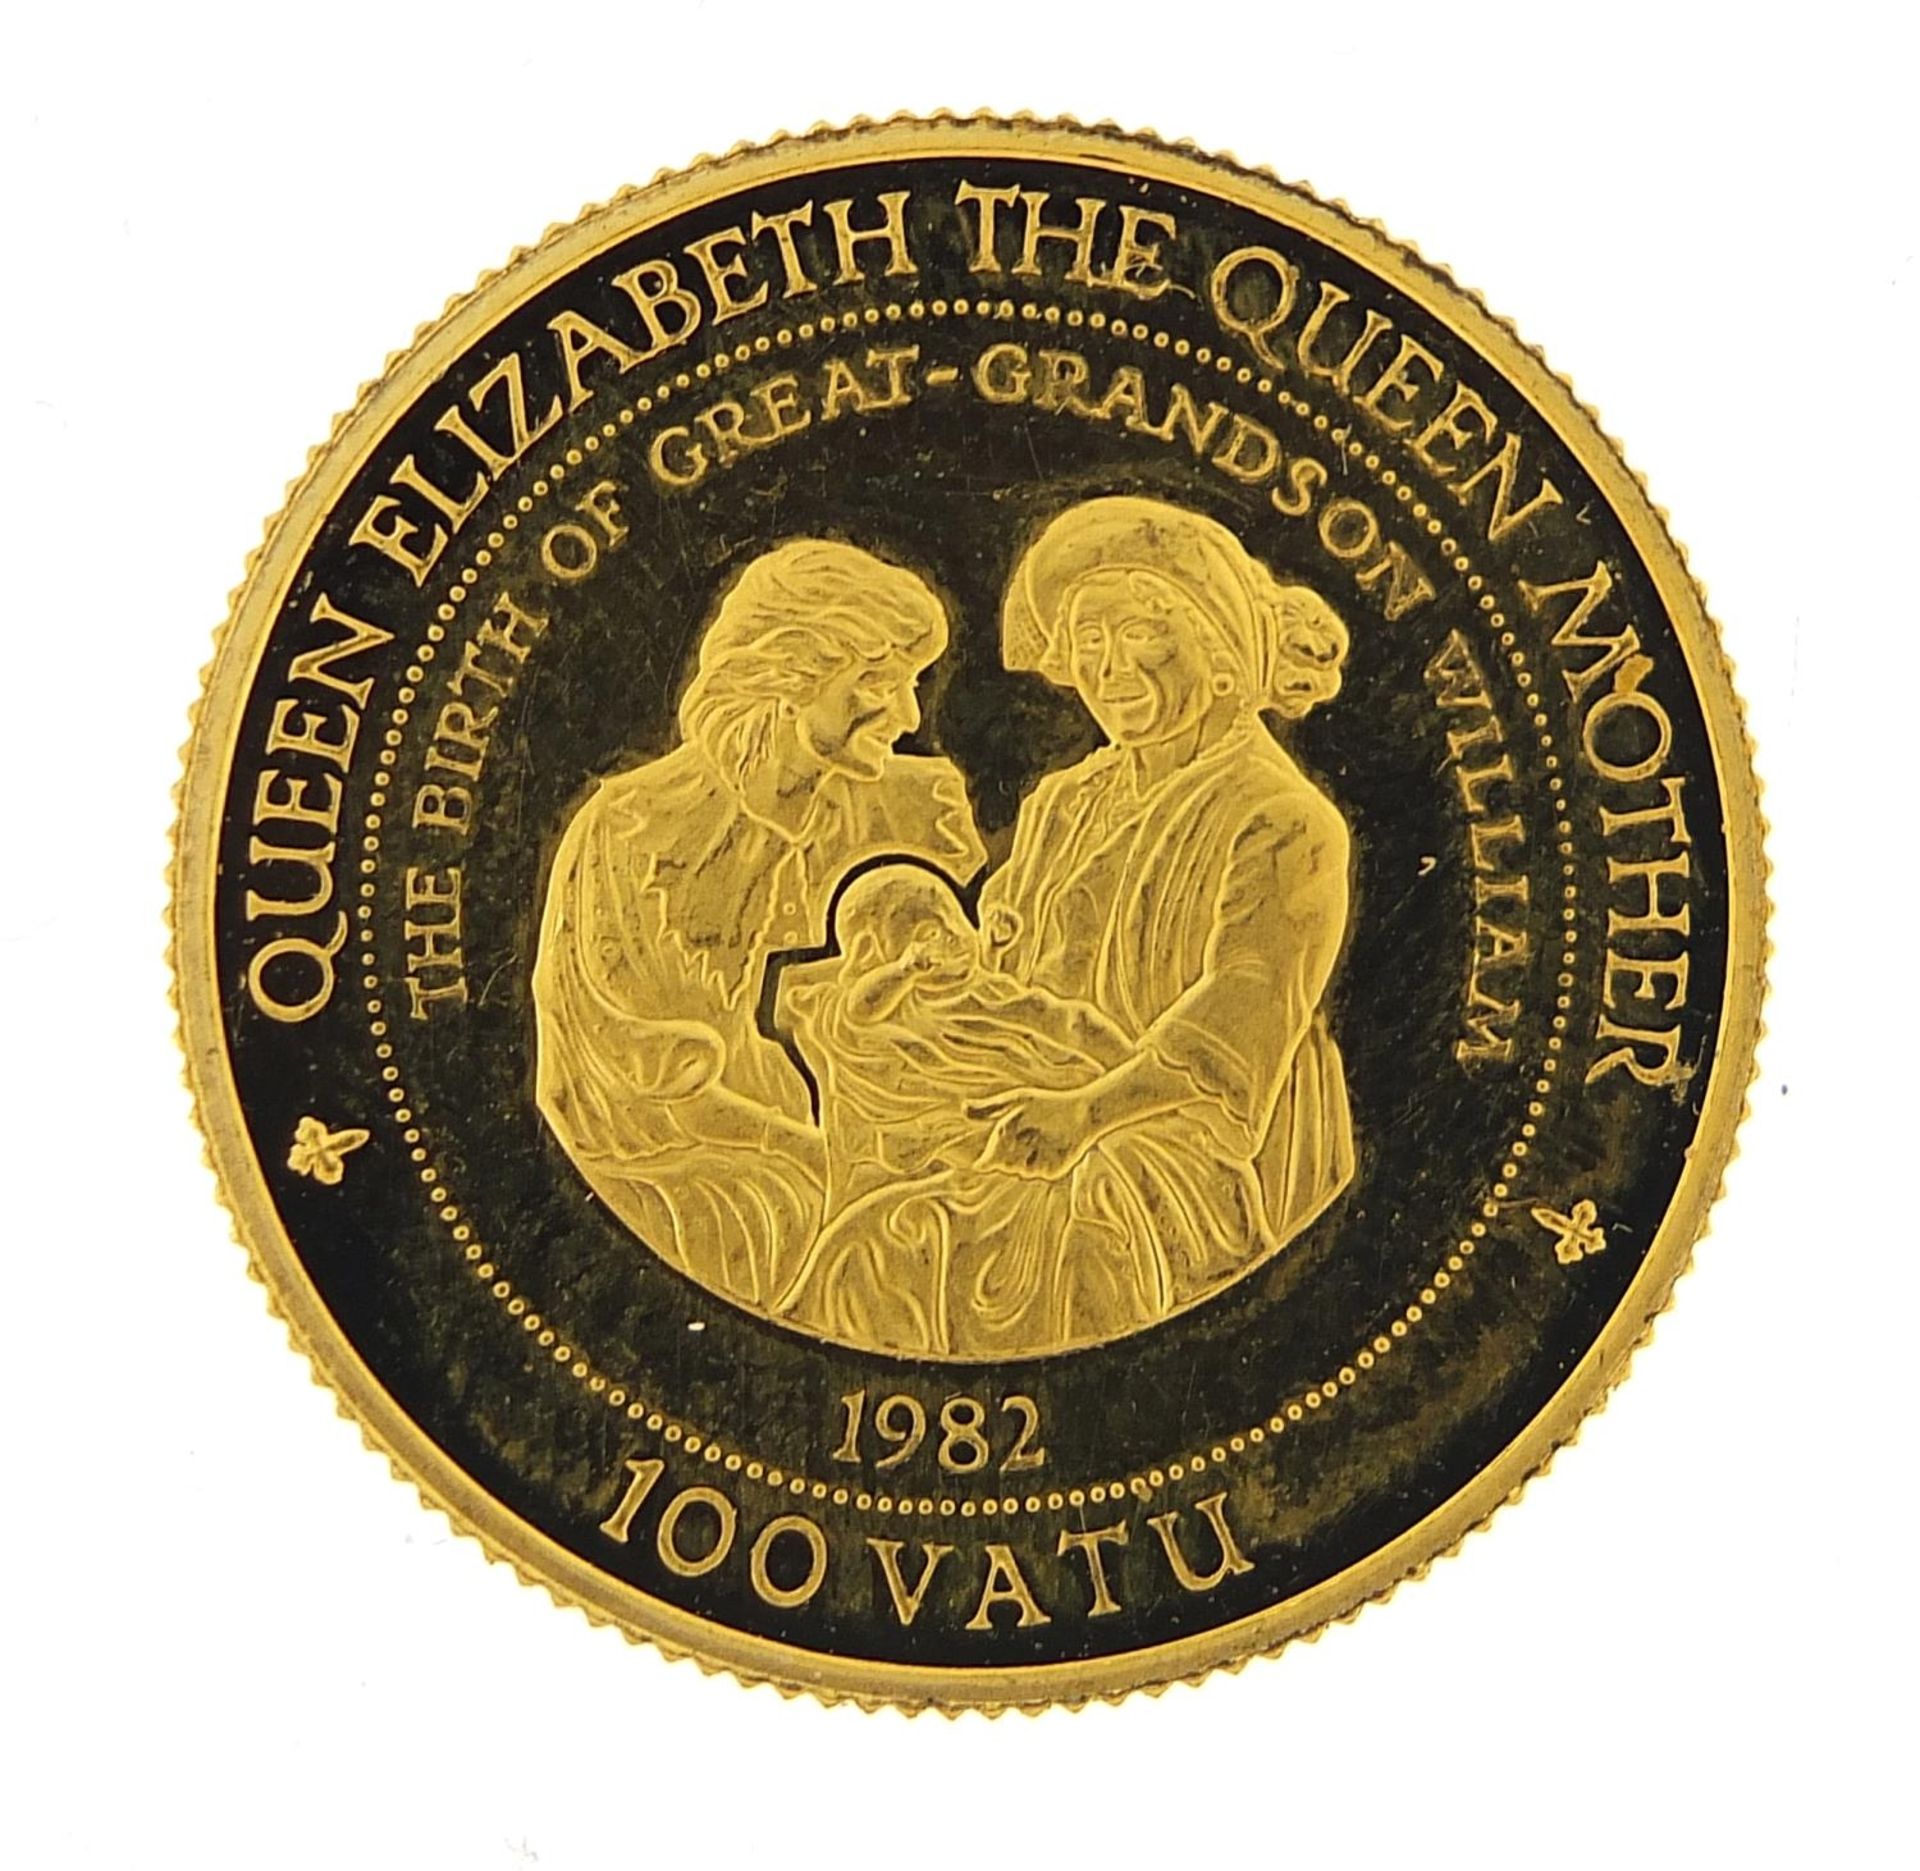 Queen Elizabeth - The birth of Great Grandson William 1982 commemorative gold coin, 8.0g - this - Image 2 of 3